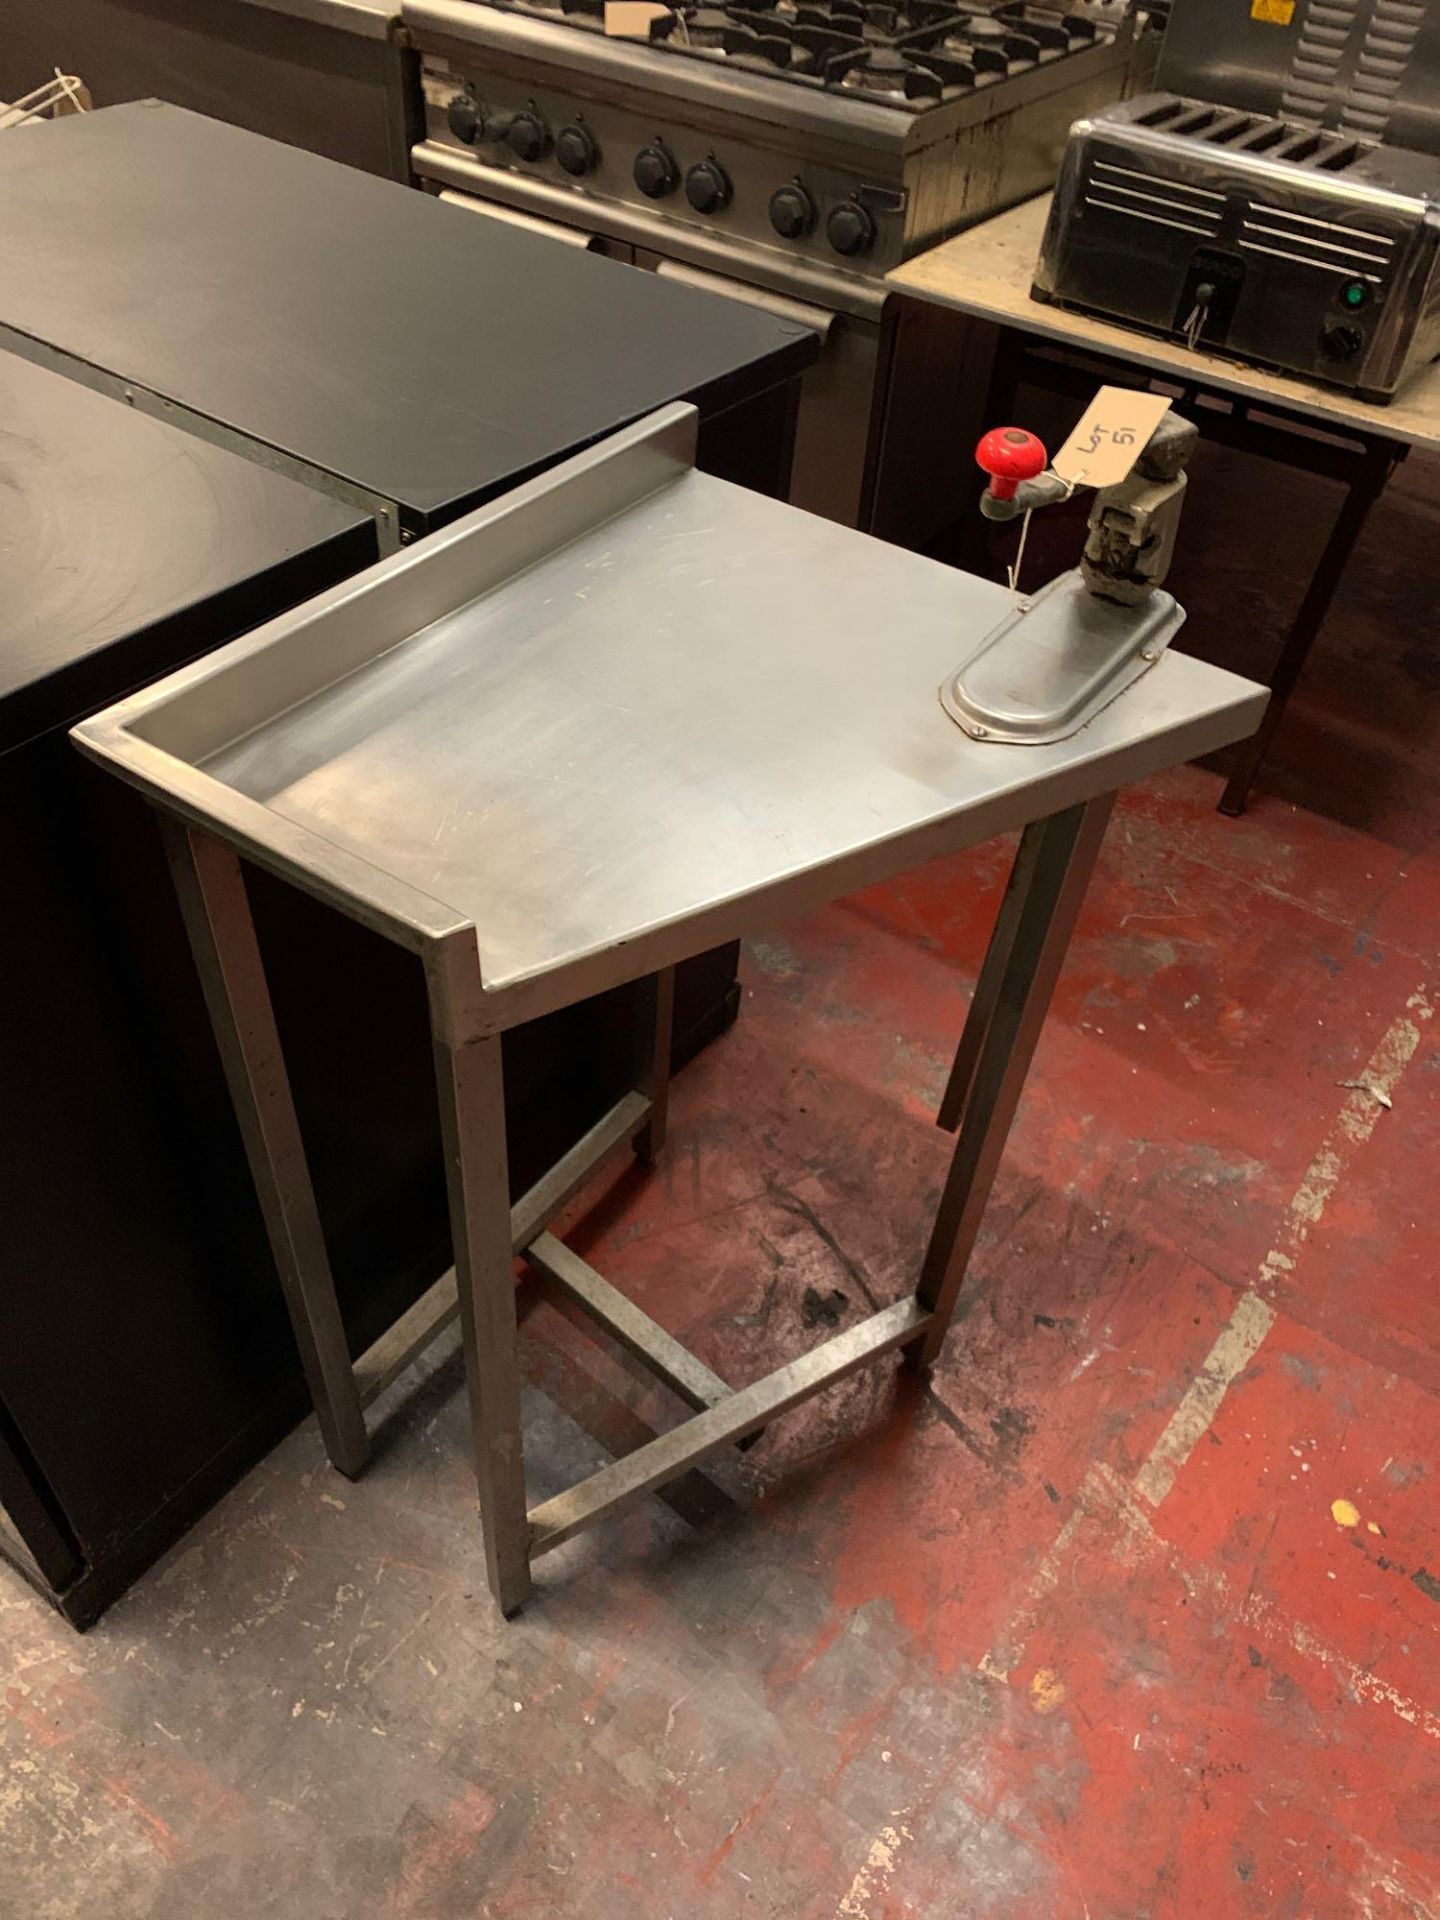 Stainless Steel preparation aation Table With Can Opener 58cm X 51cm X 85cm - Image 4 of 4